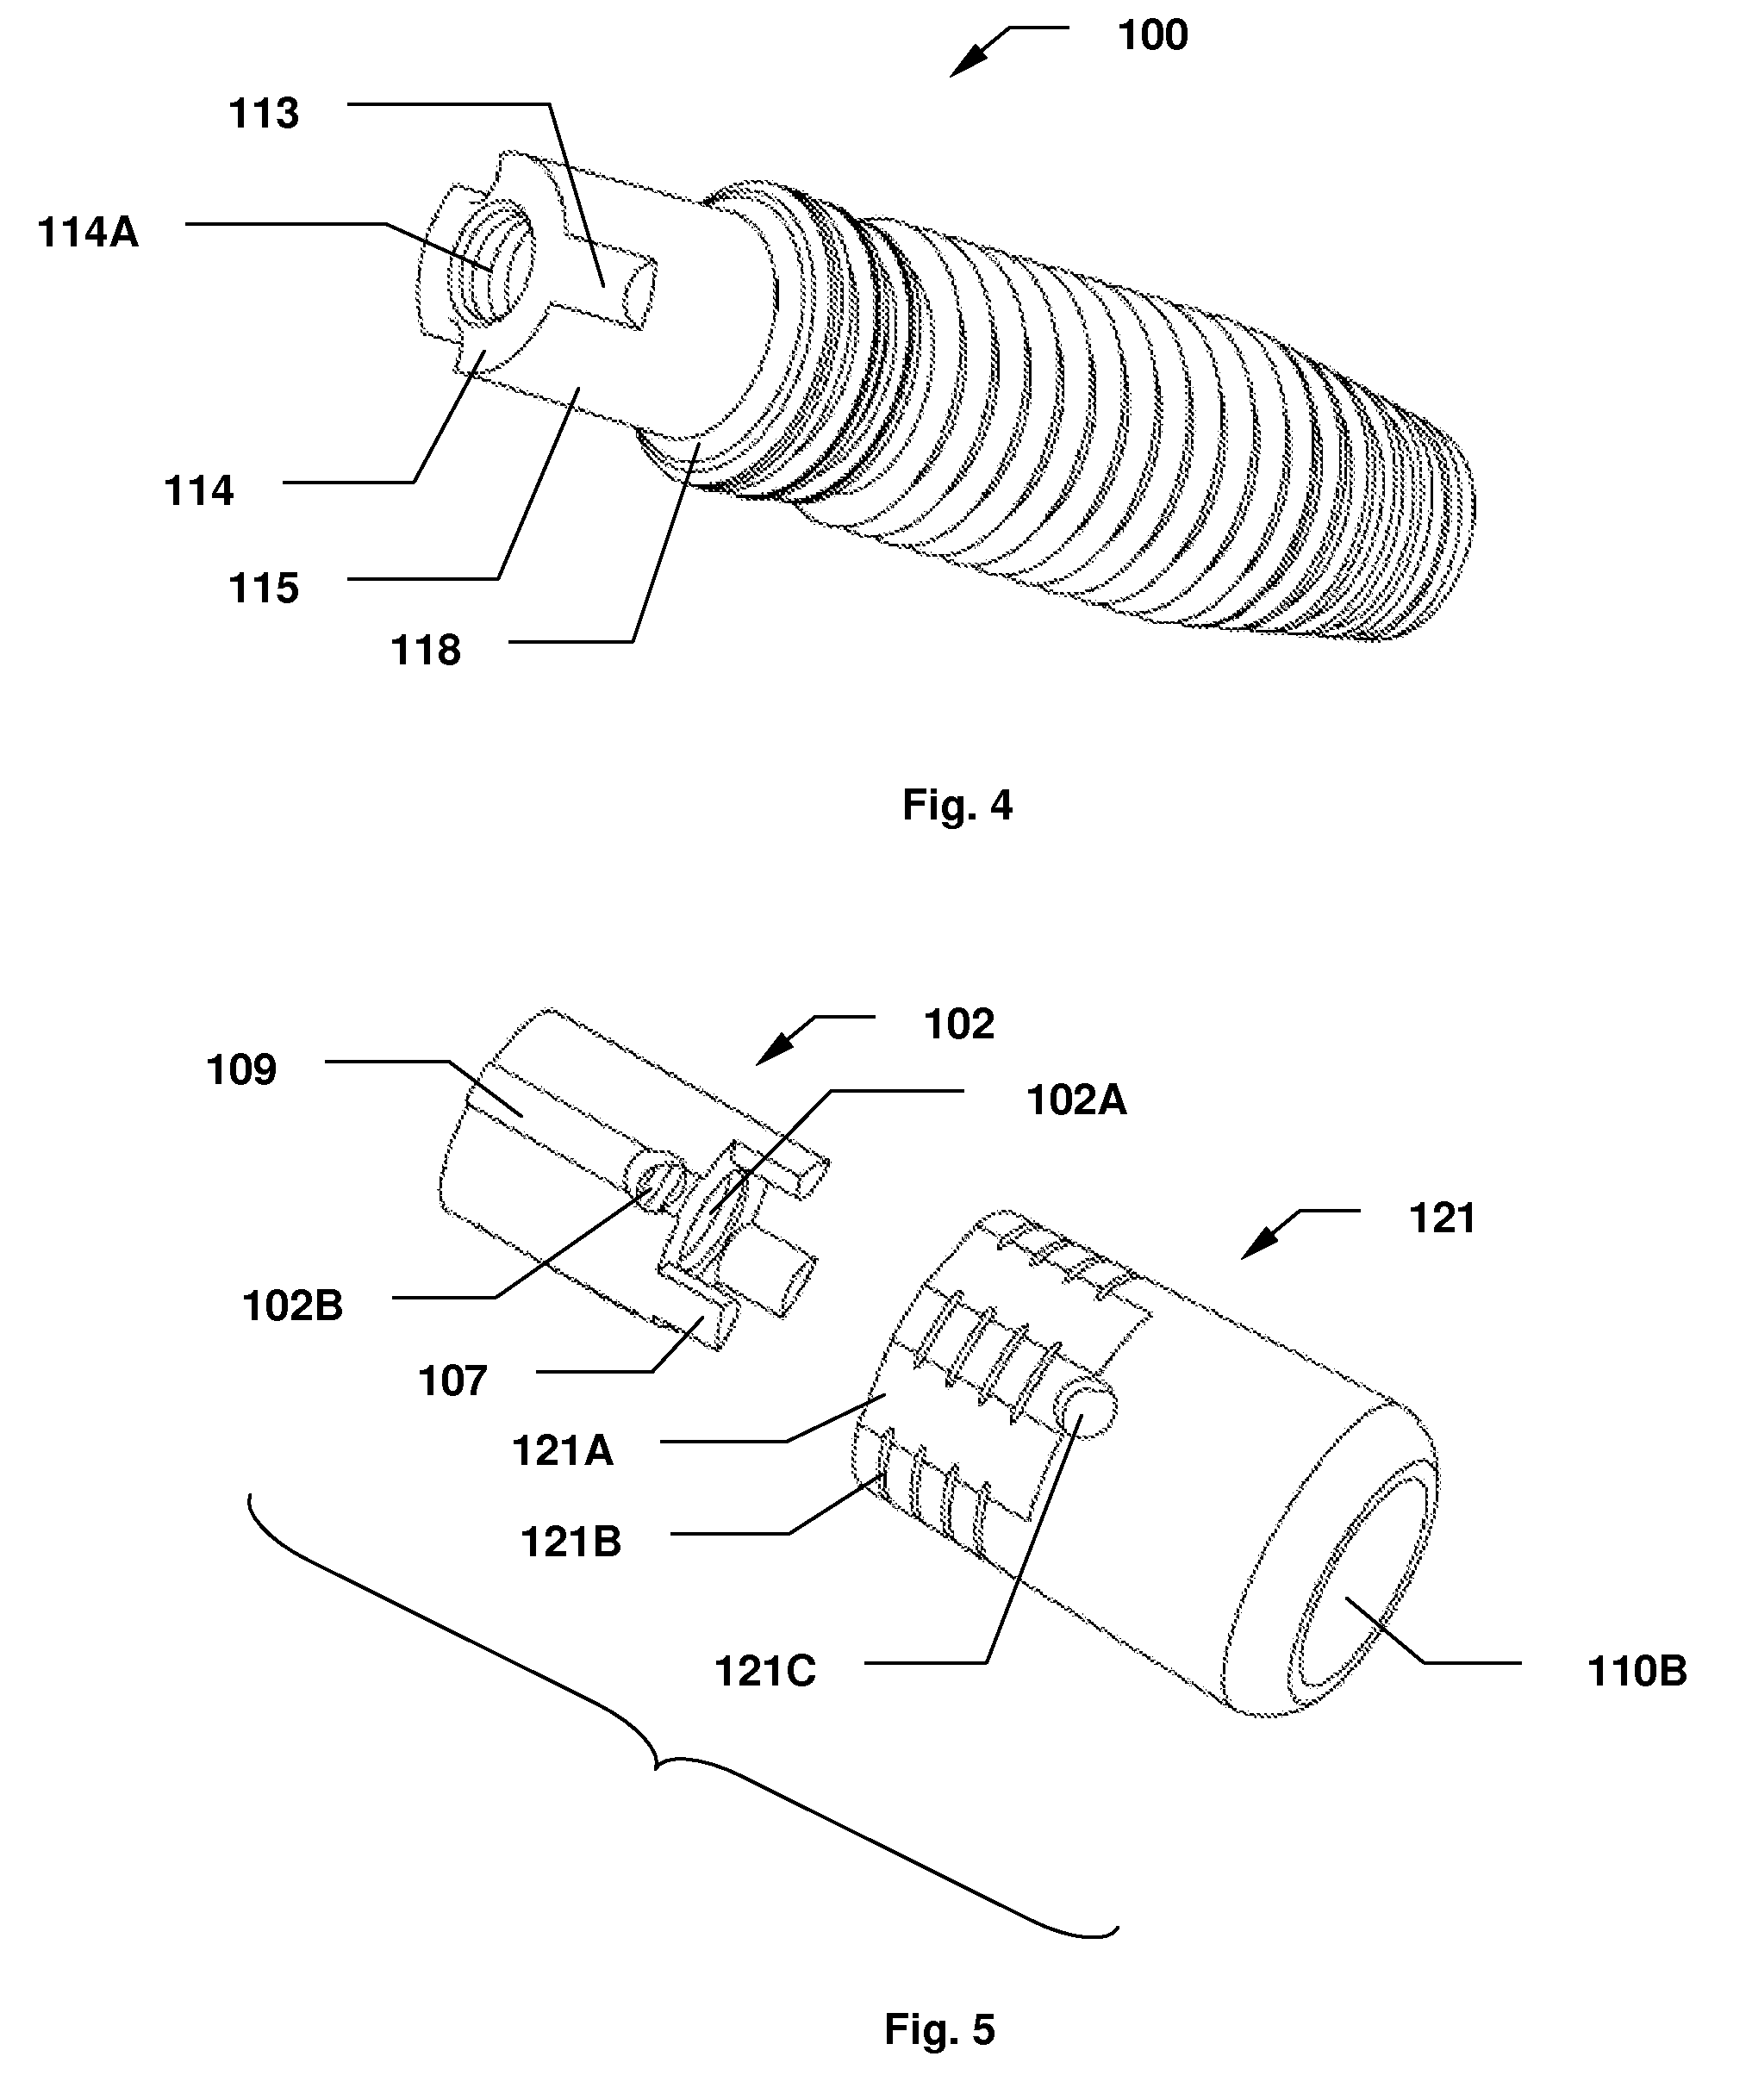 Dental Implant System and Method